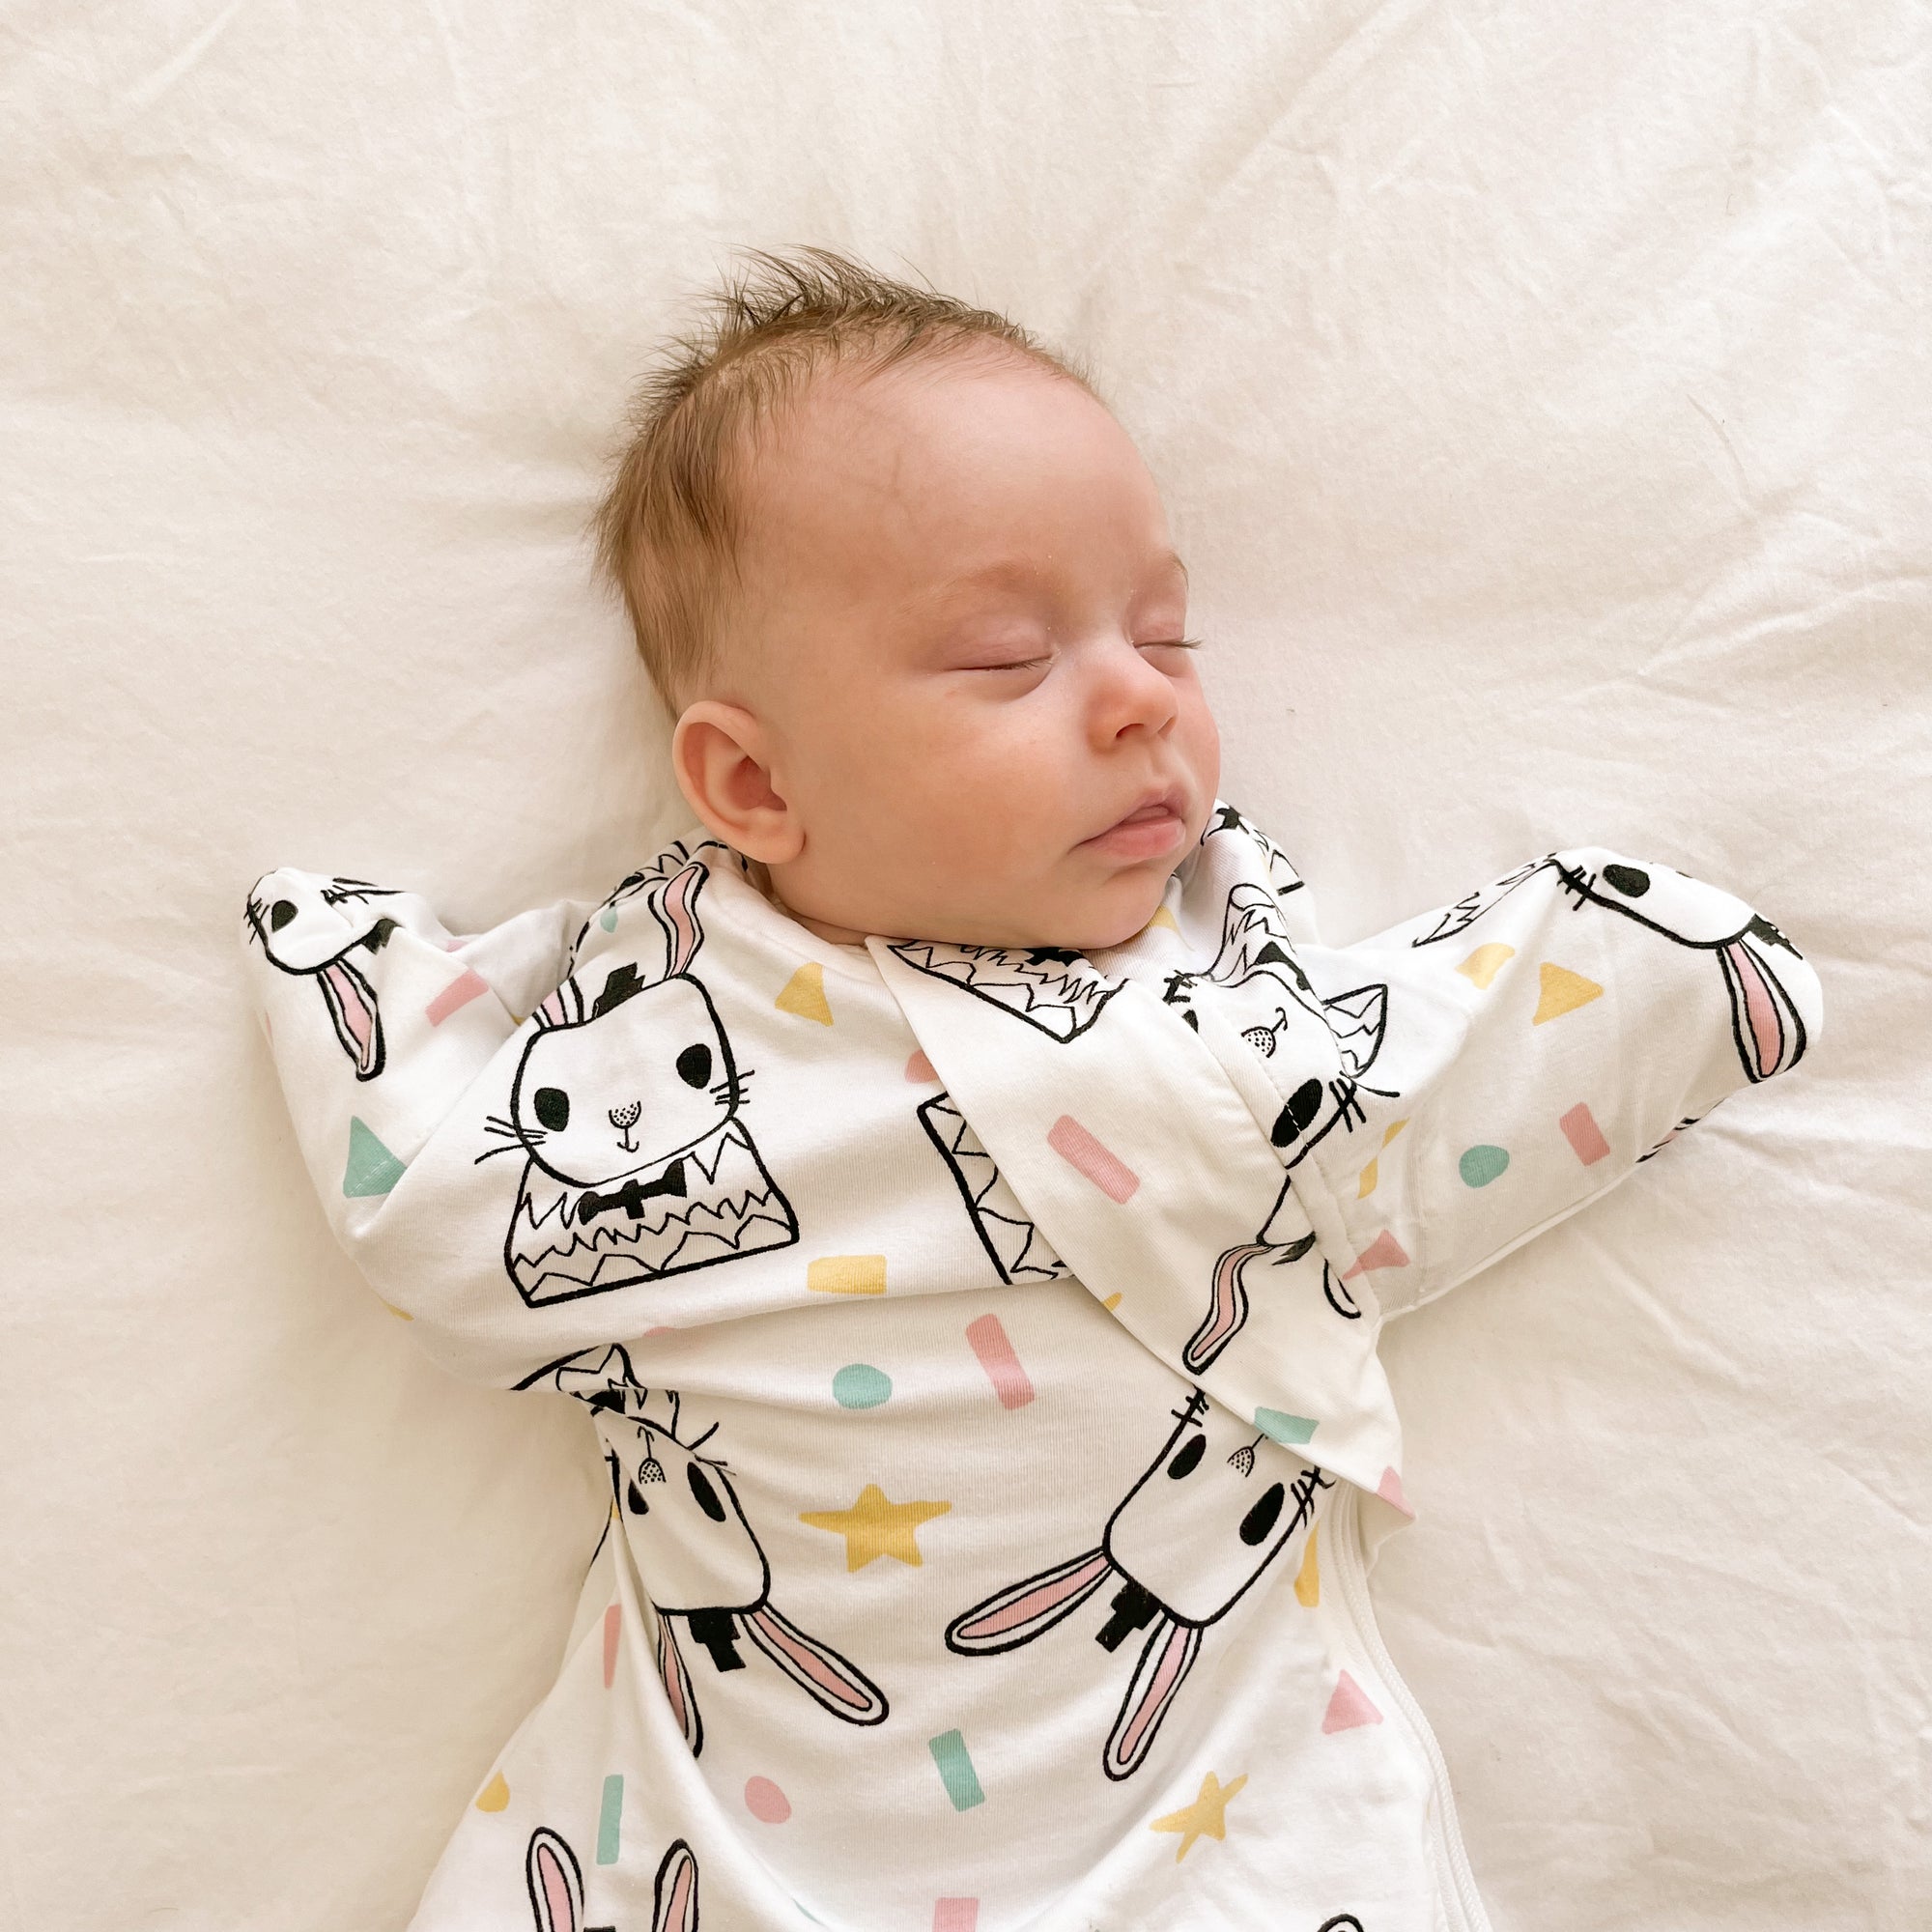 Sleepy Hugs Original baby sleep bag for transitioning from swaddling to free arms